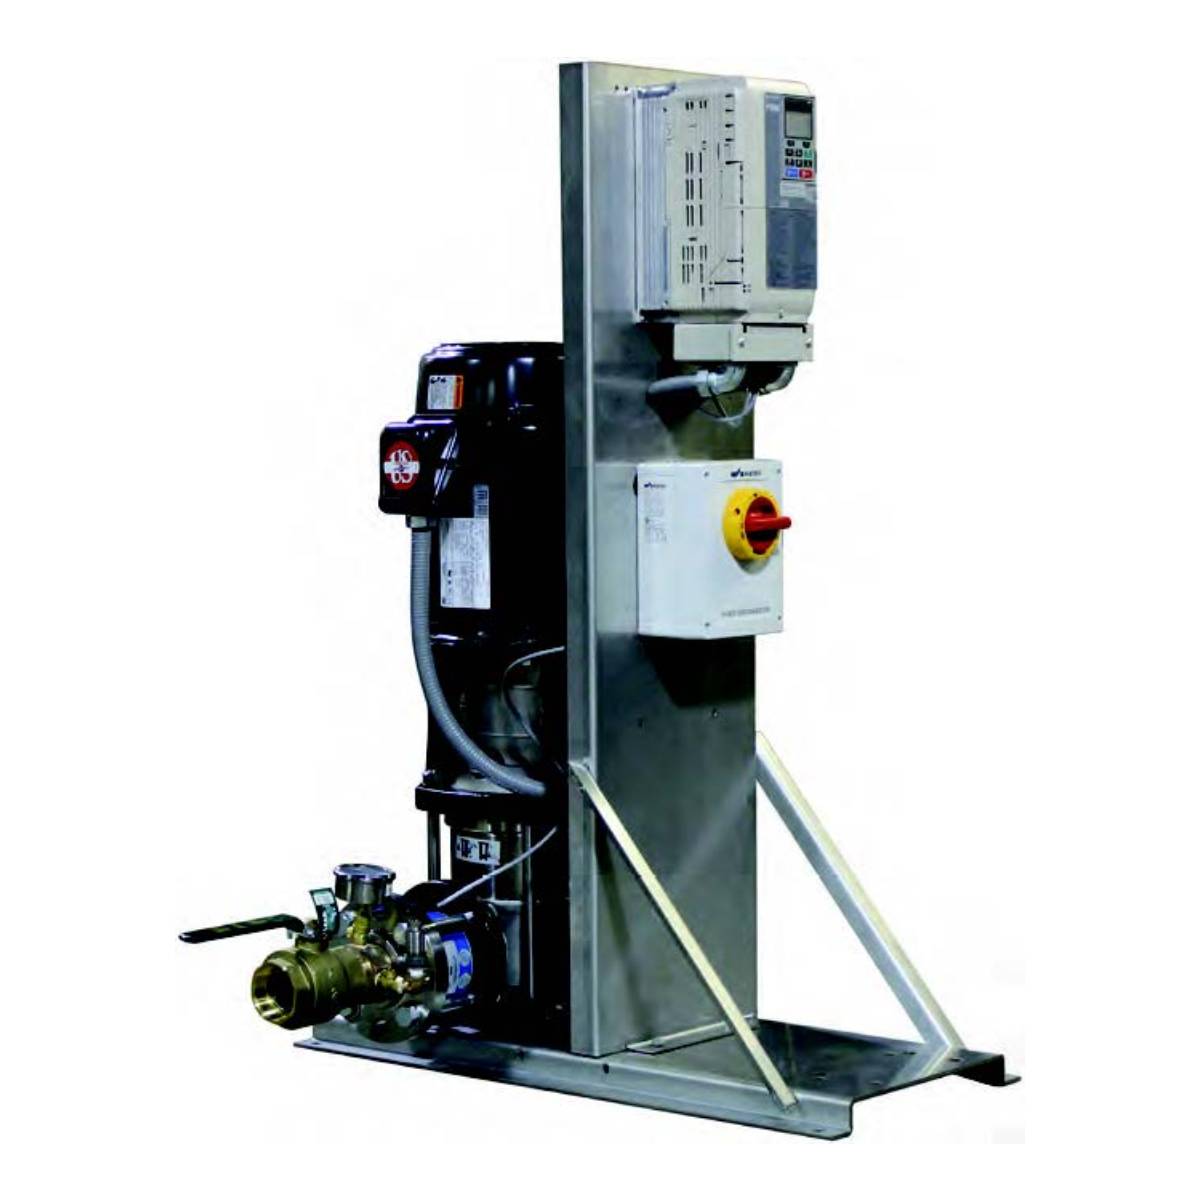 Simplex - Hydraulic Press Selection Guide